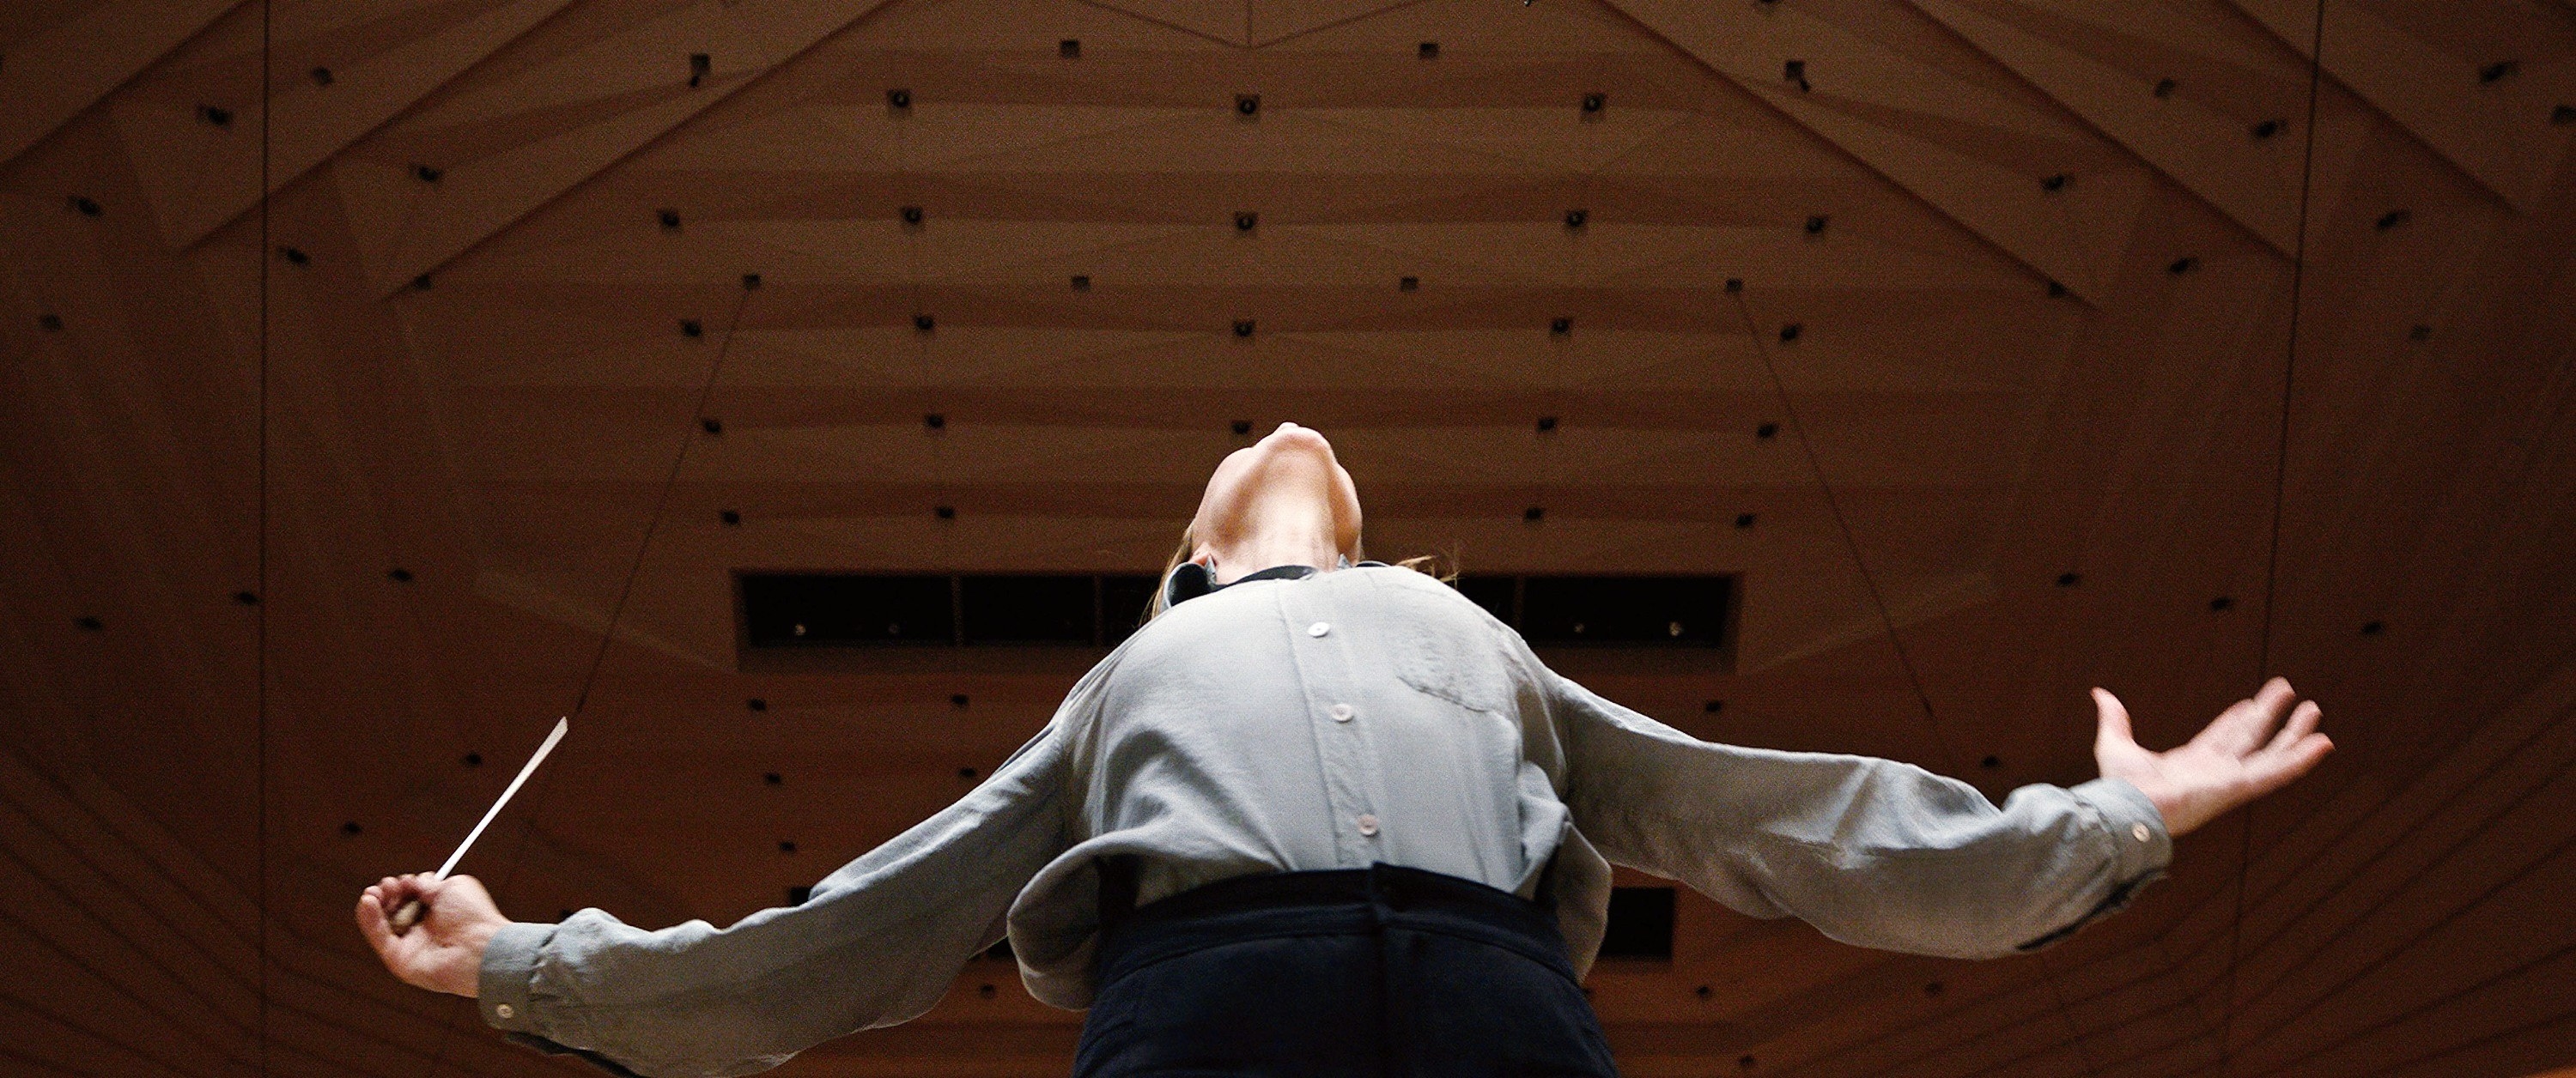 Lydia conducting her arms outstretched, angle from below looking dramatic